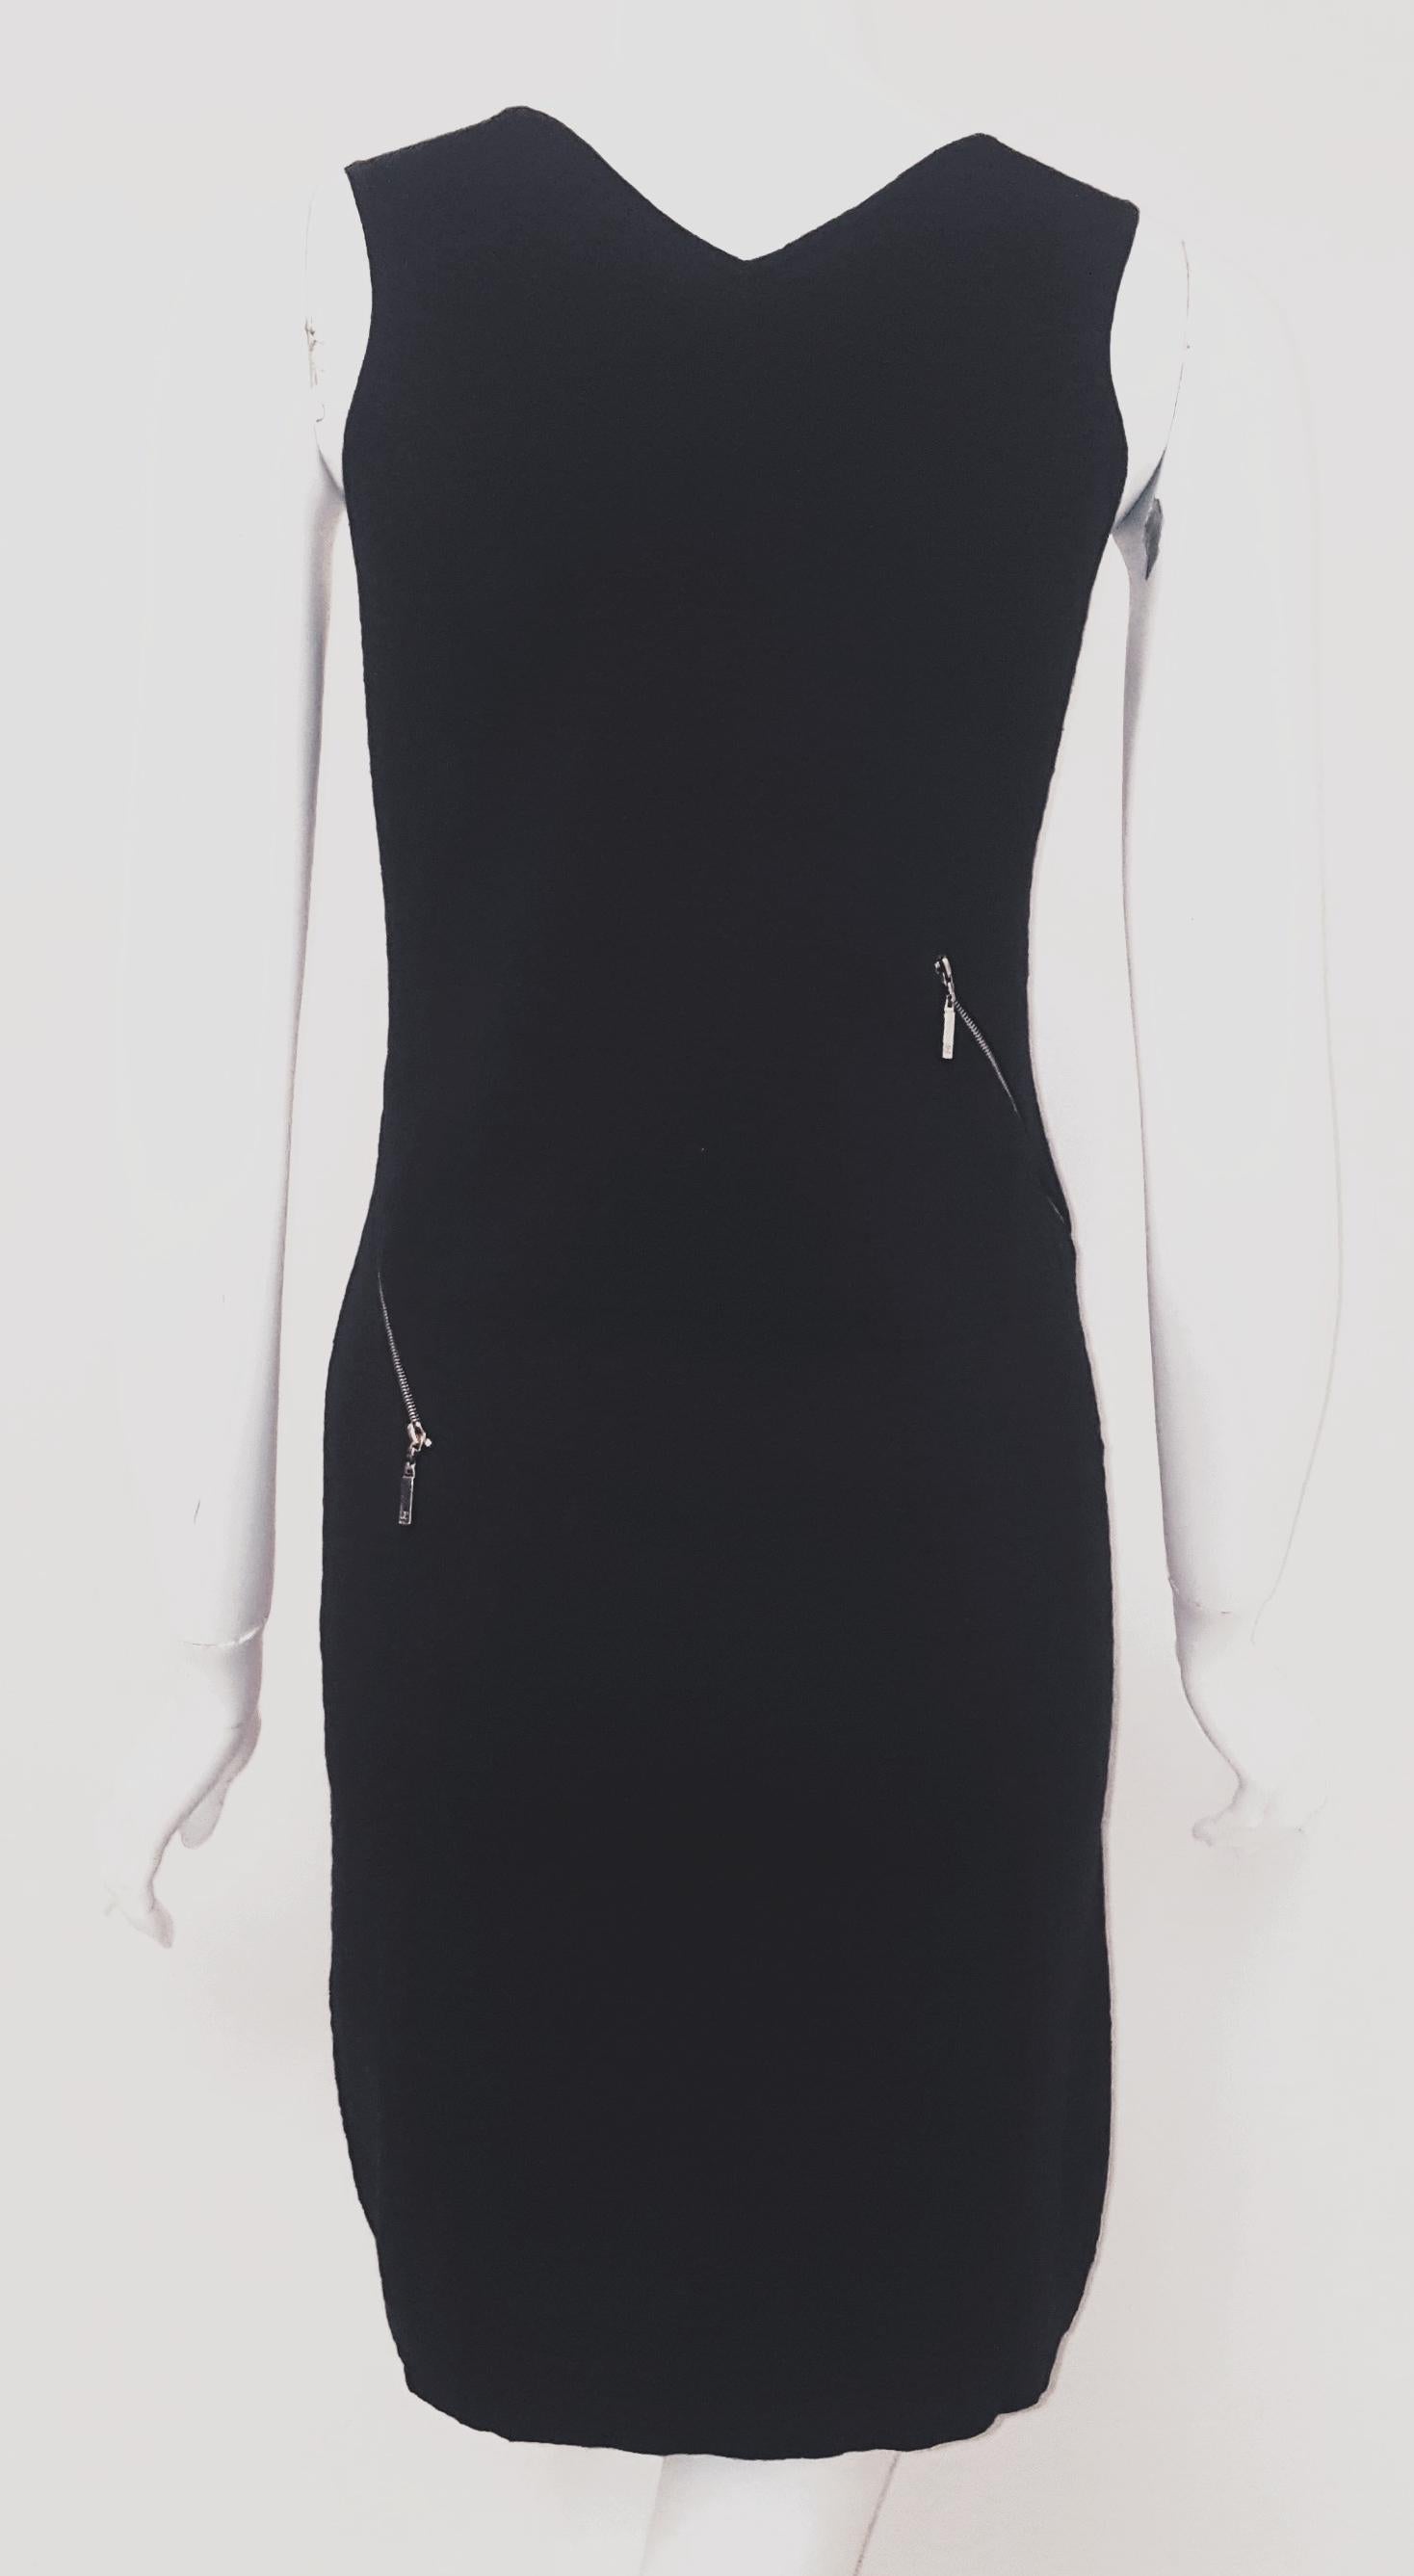 Chanel Black Sleeveless Pullover Dress Decorated w CC Gold Tone Zippers In Excellent Condition For Sale In Palm Beach, FL